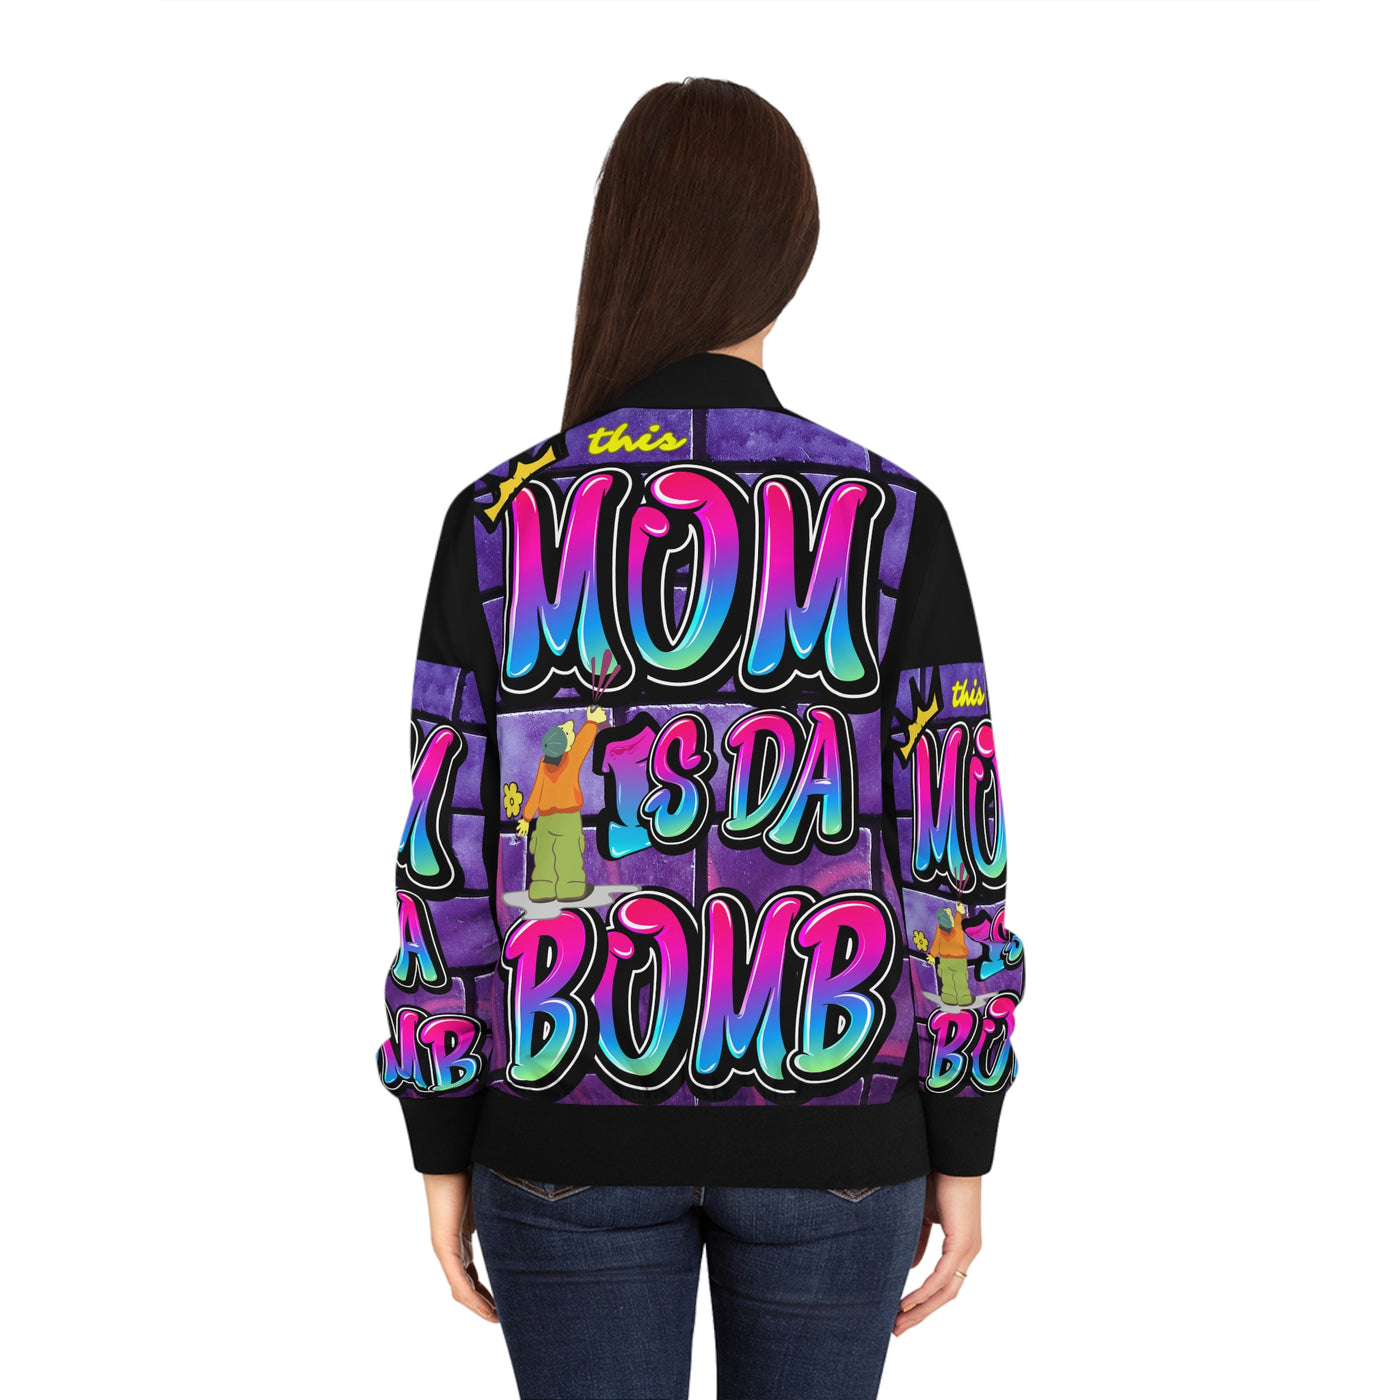 (AOP) Bomber THE - BOMB Retro Women\'s IS – Black Rich 90s - MOM THIS Jacket Vibes